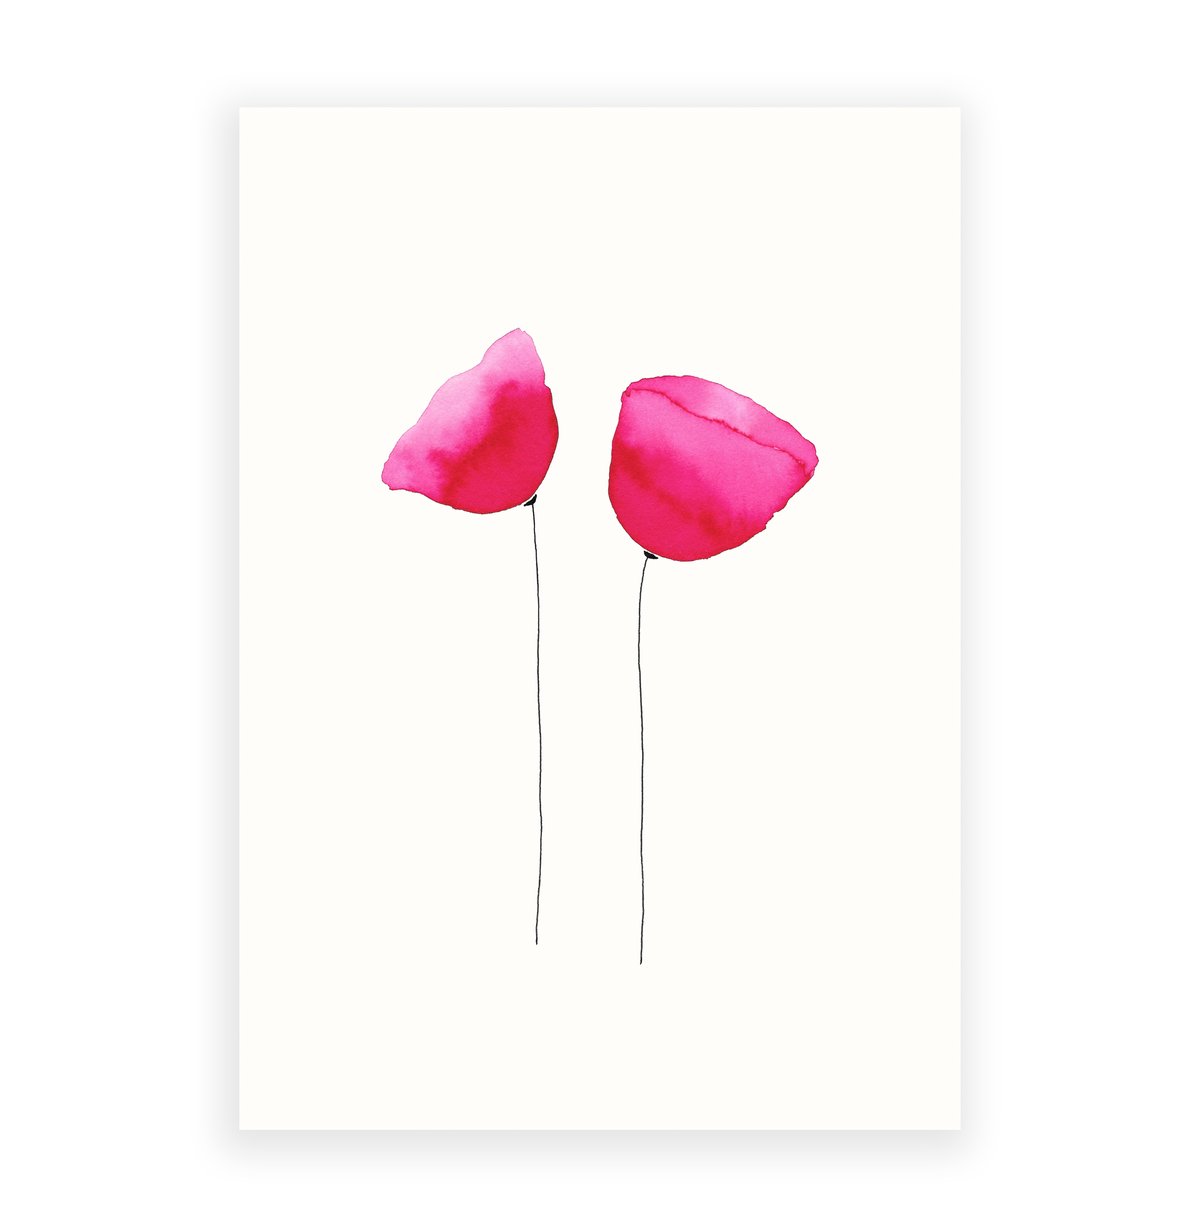 Image of Two poppies / Deux Coquelicots